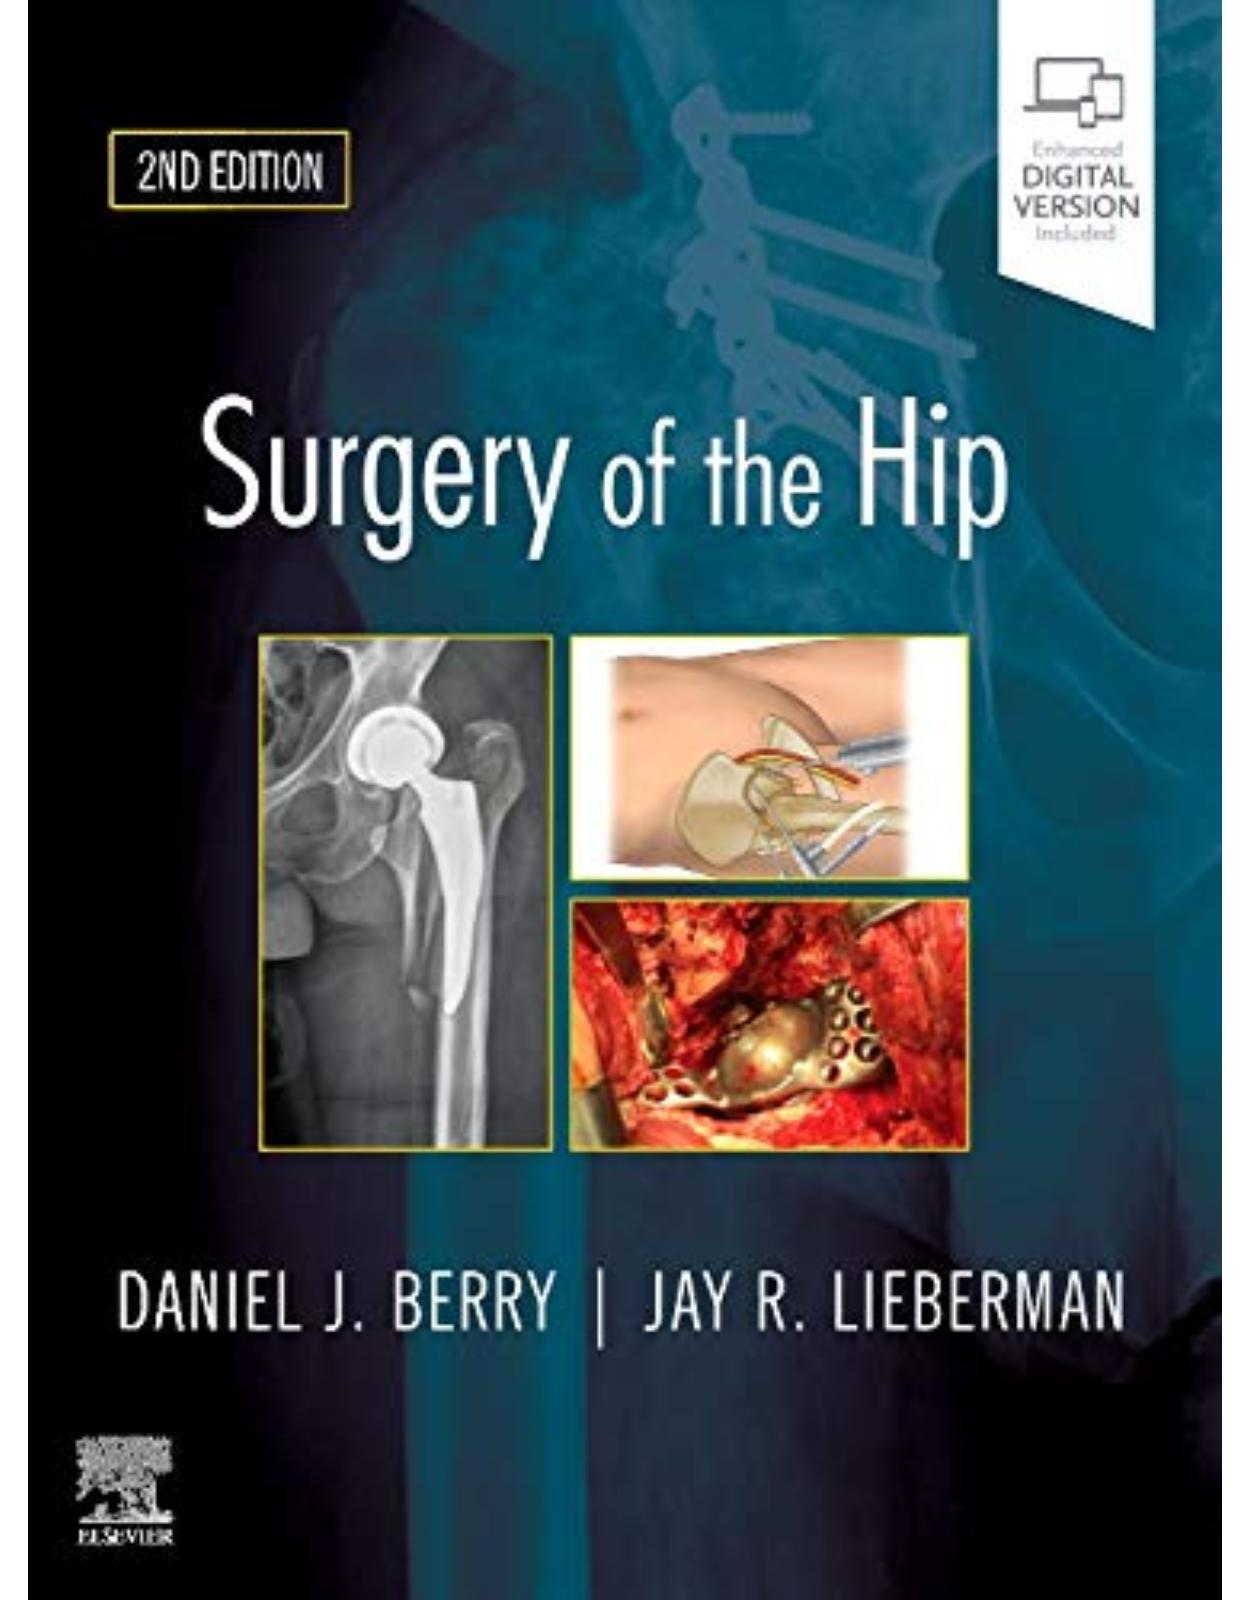 Surgery of the Hip, 2nd Edition